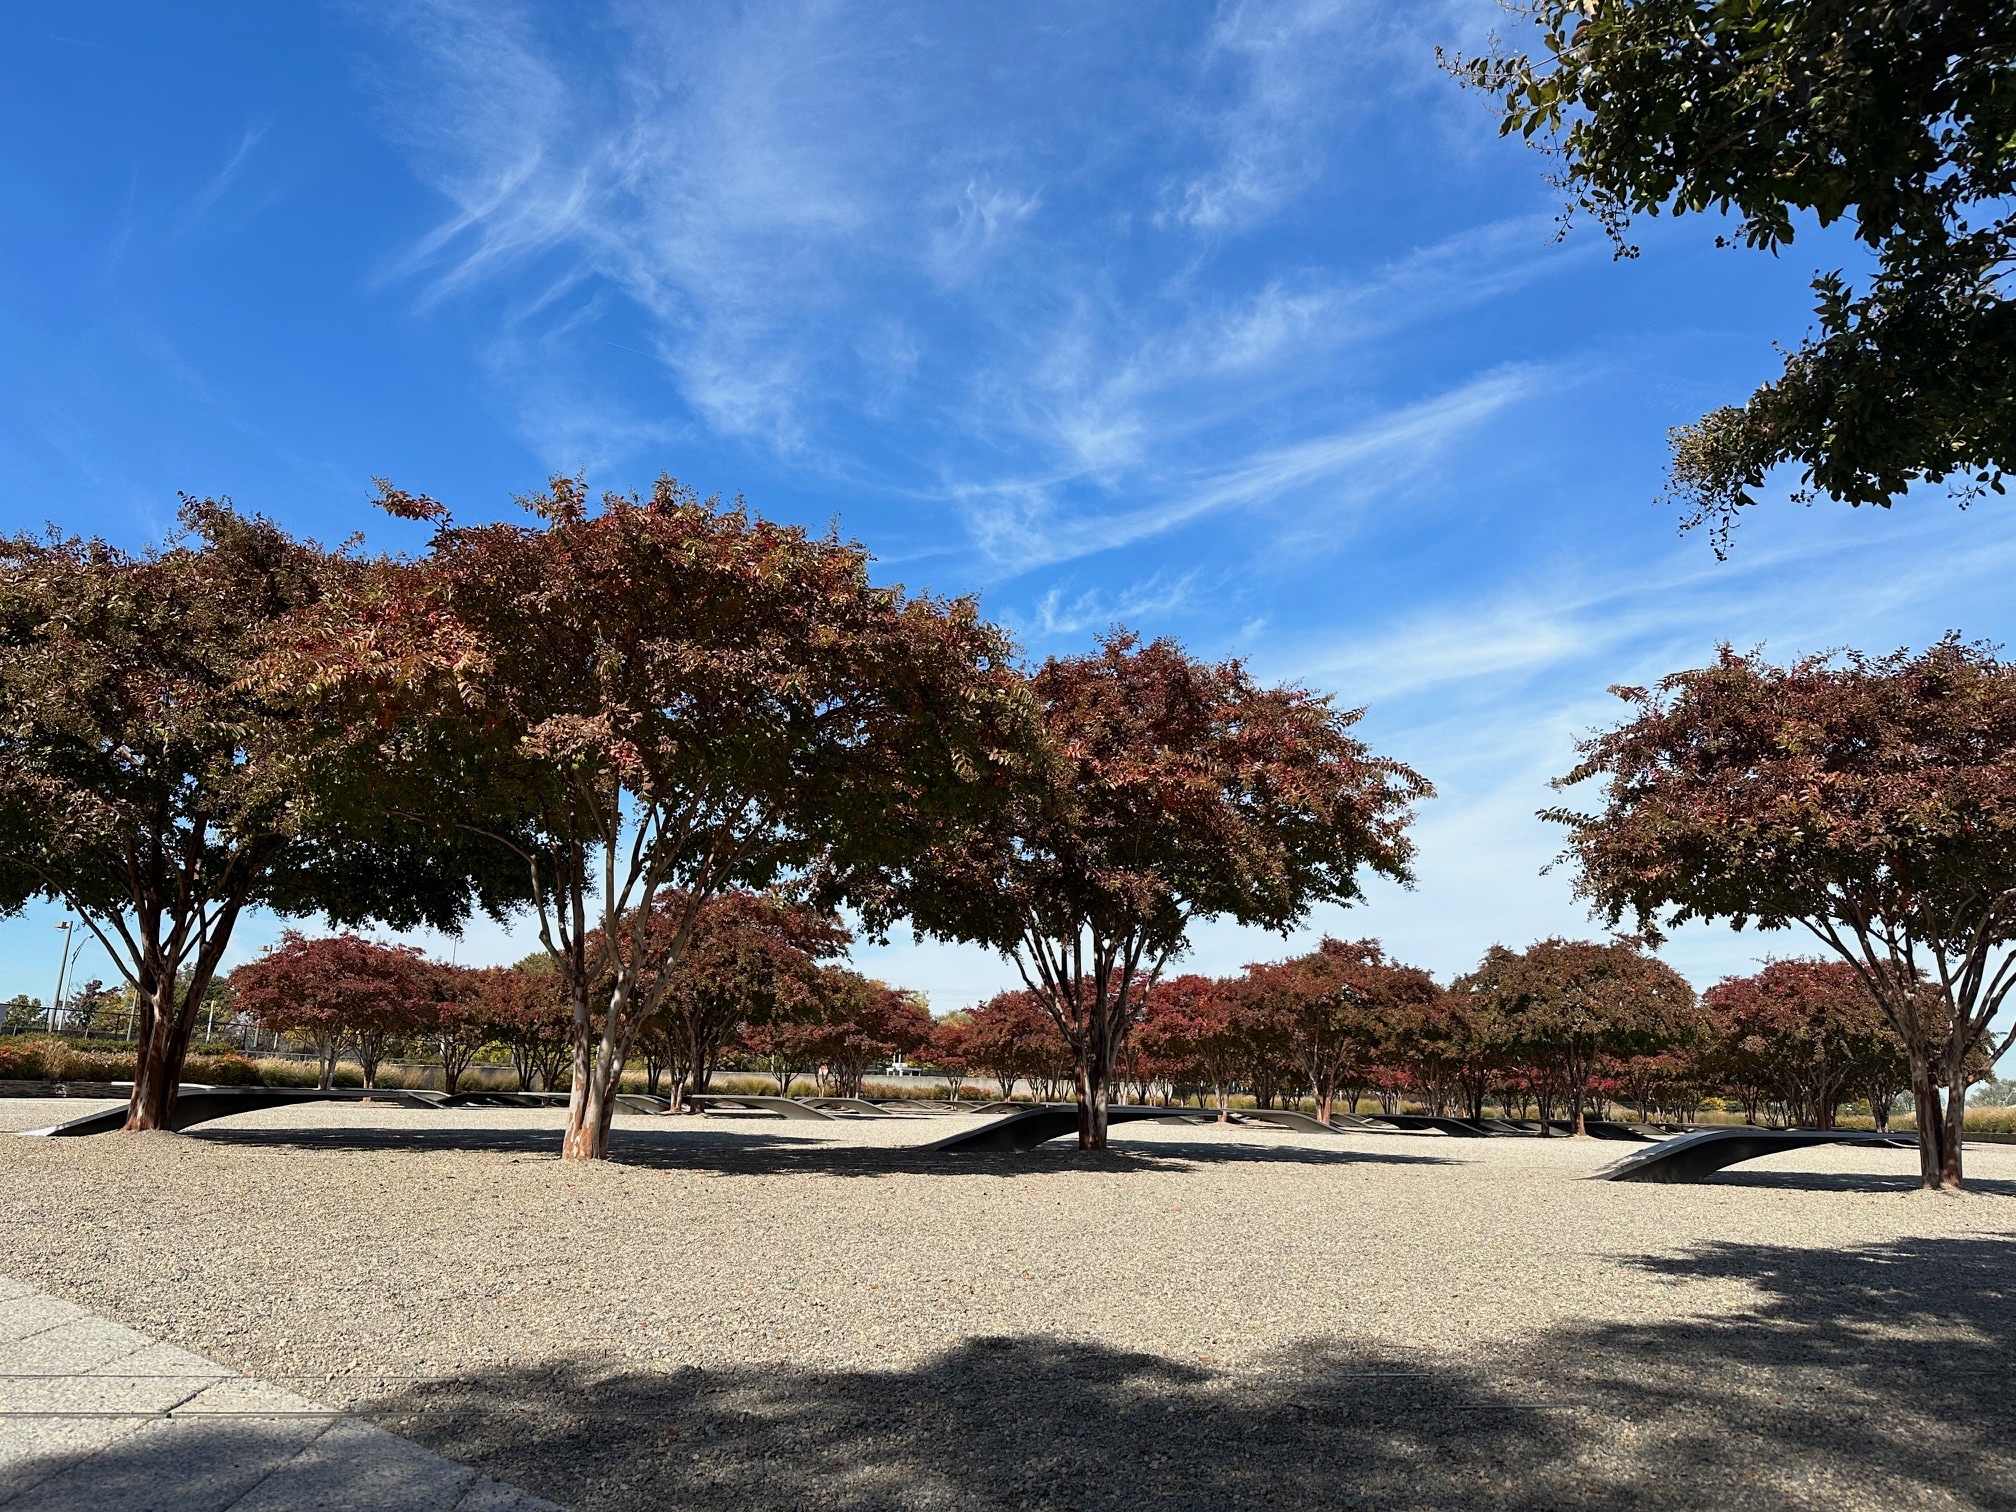 Trees against a blue sky at the Pentagon Memorial.